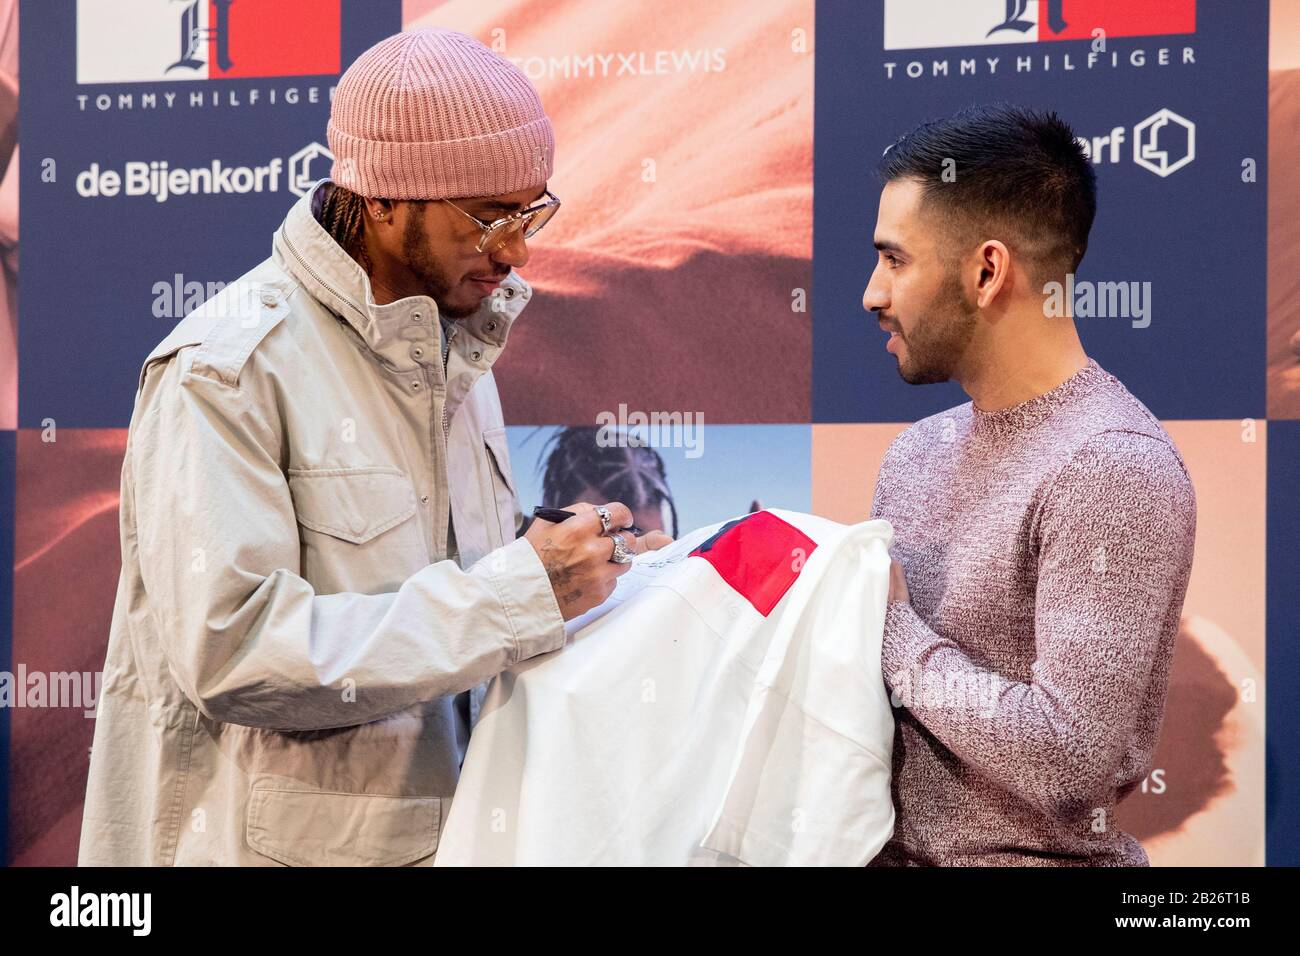 Amsterdam, Netherlands. 20th May, 2019. Lewis Hamilton signs a shirt of Tommy  Hilfiger for a fan during the launch party of TommyXLewis at the Dutch  warehouse De Bijenkorf, Amsterdam. Credit: SOPA Images